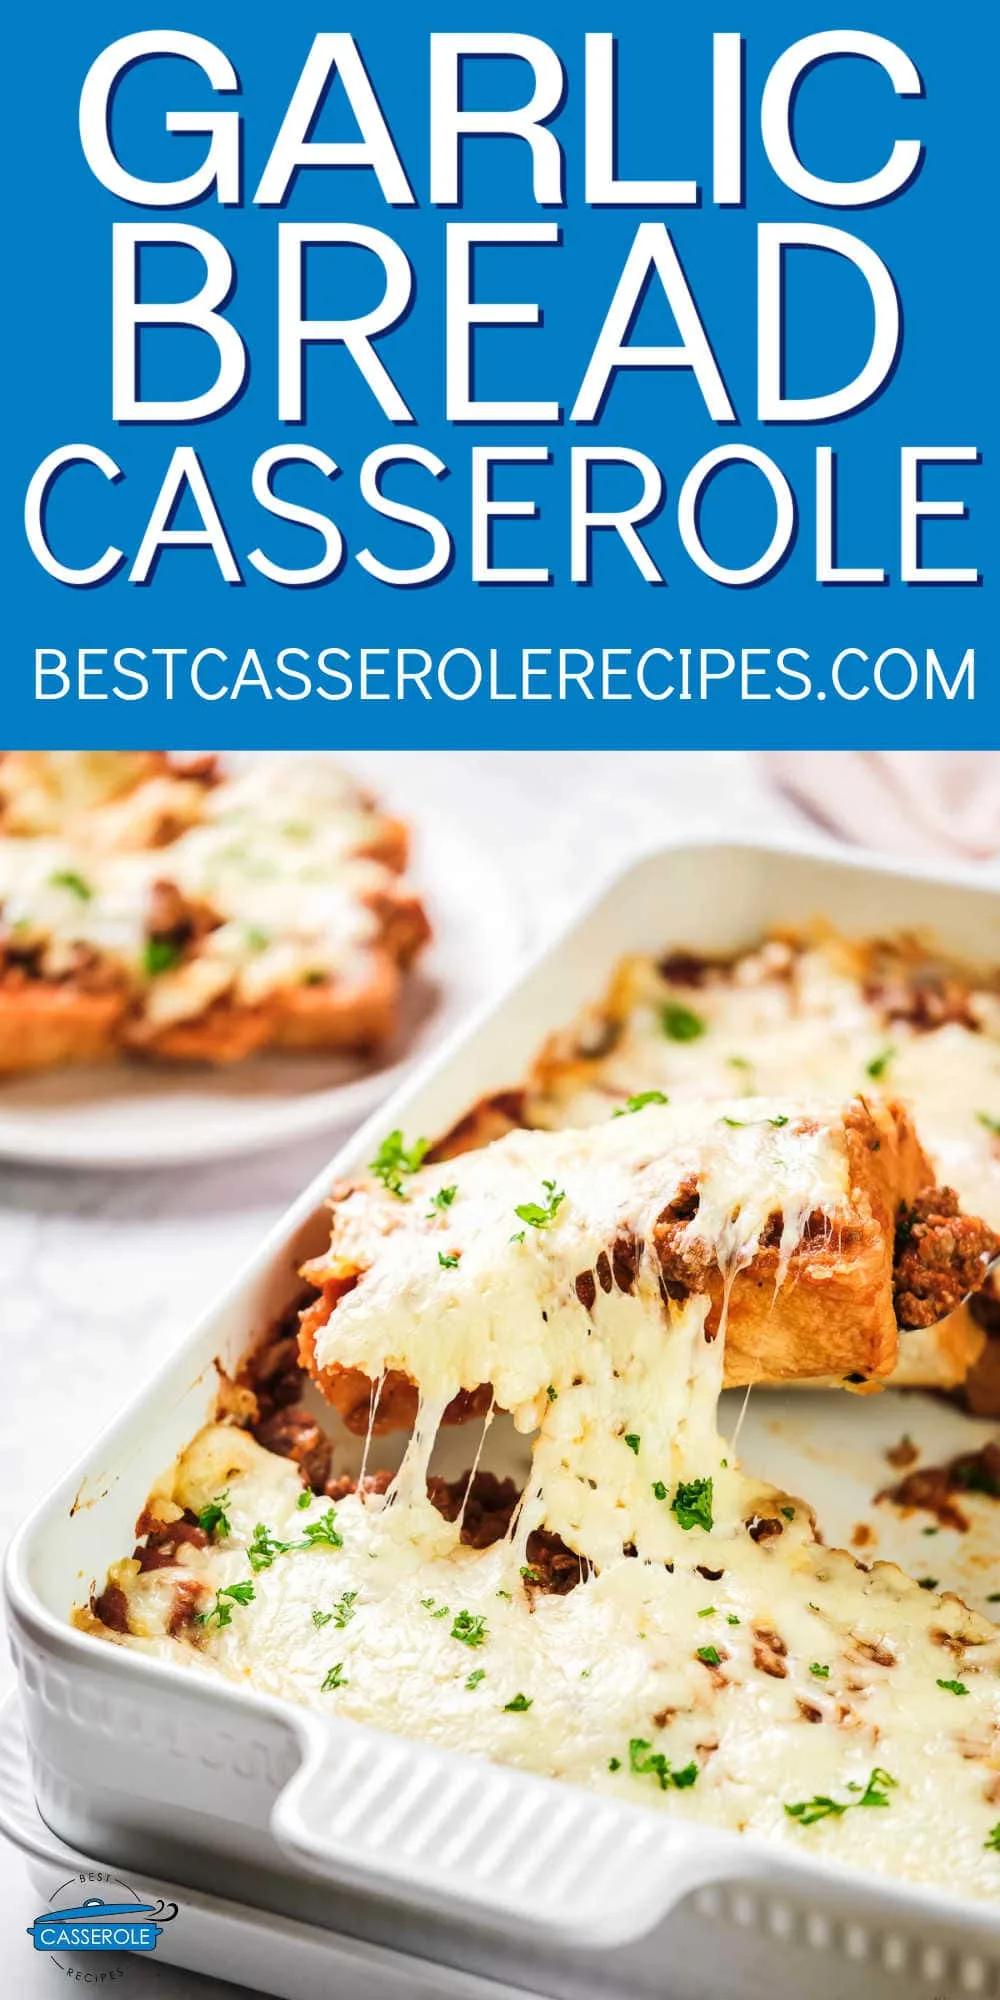 garlic bread casserole with blue banner and white text